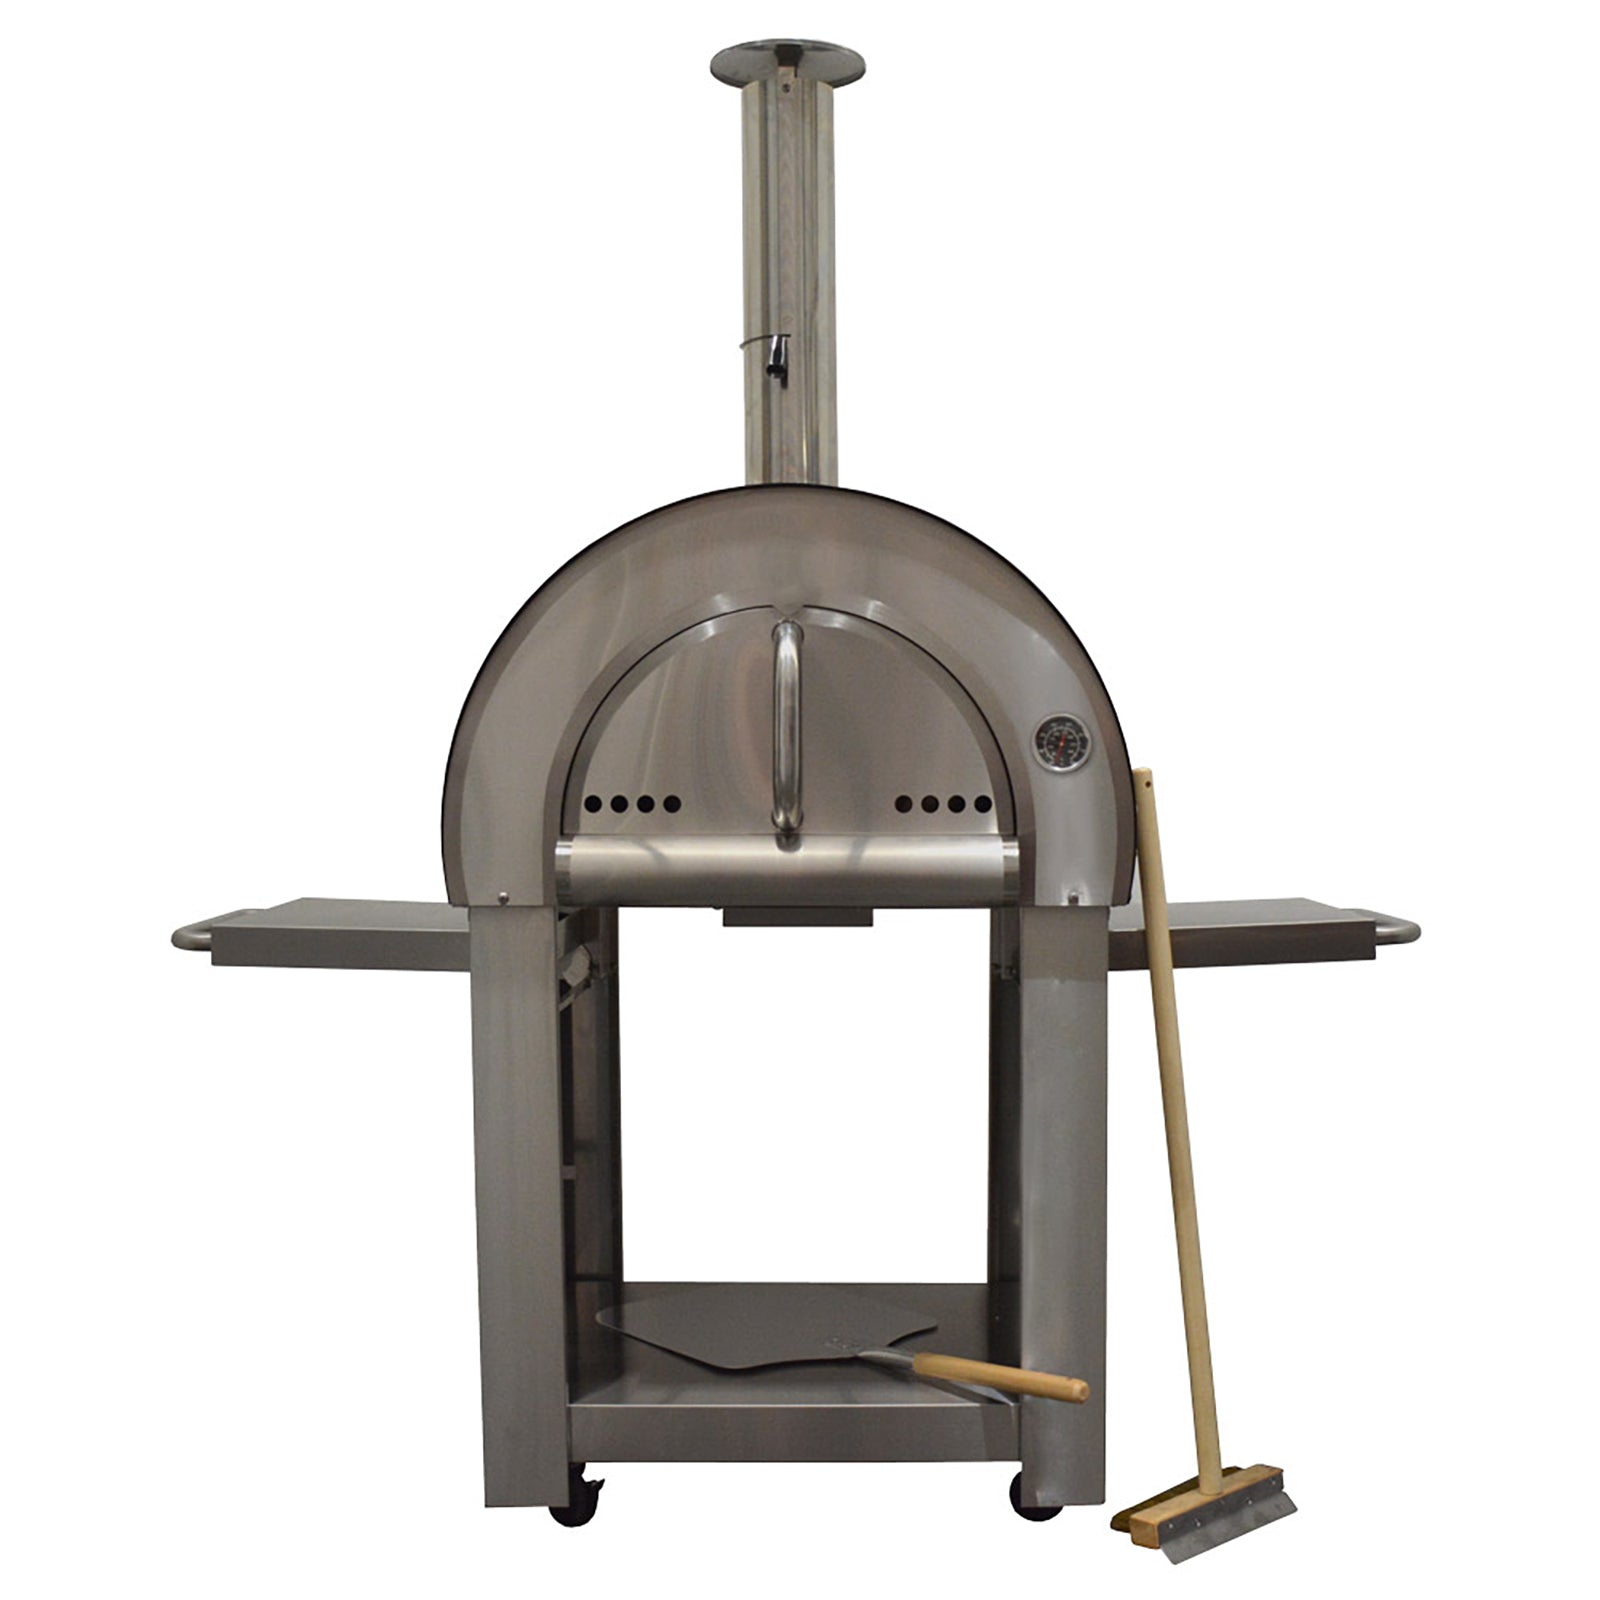 Smart Freestanding Wood Fired Pizza Oven In Black & Stainless Steel Finish